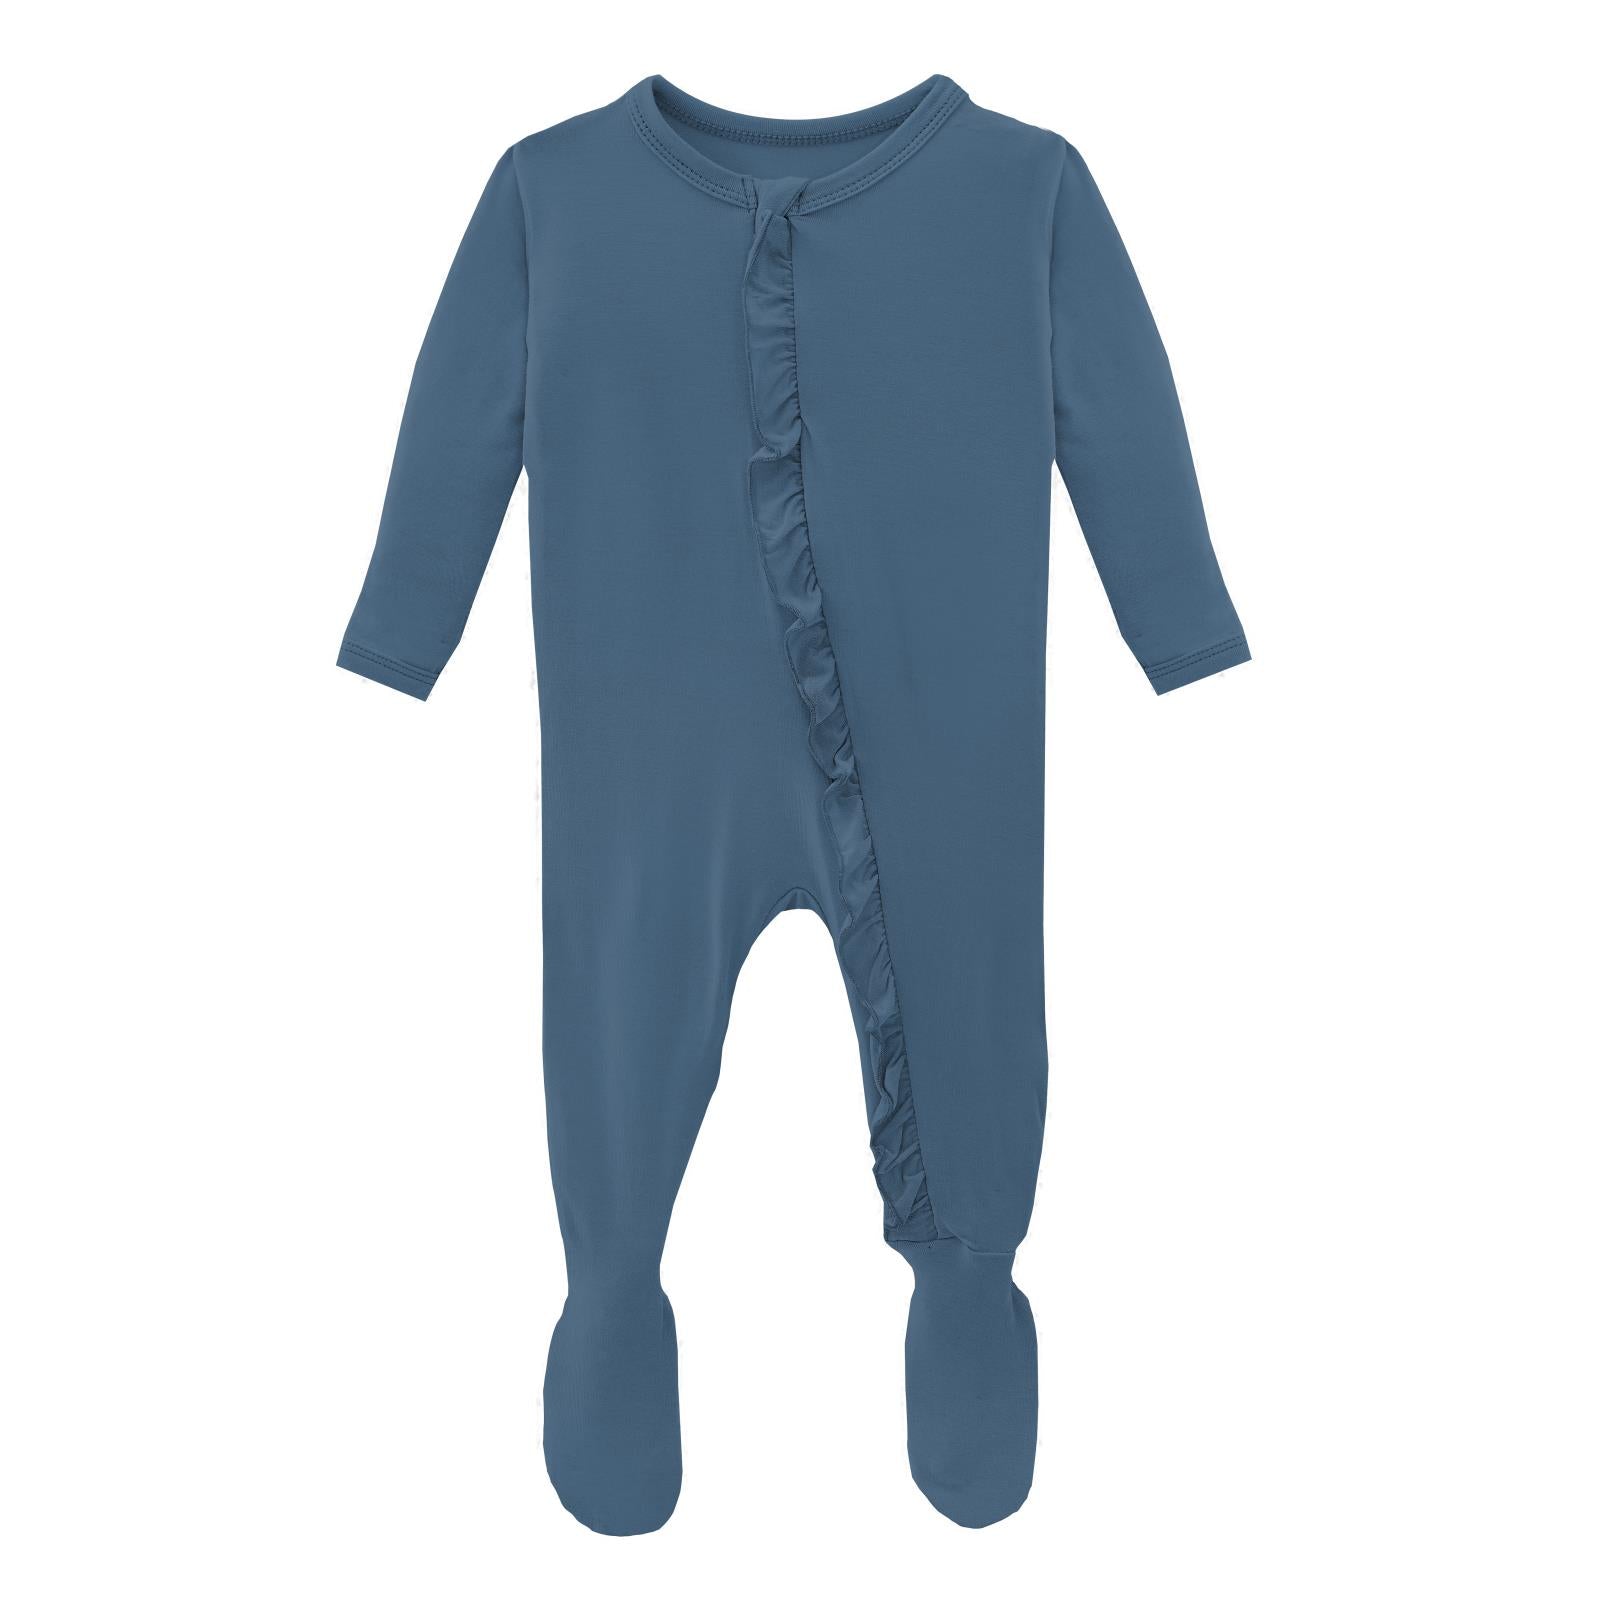 Image of Classic Ruffle Footie with Zipper in Twilight